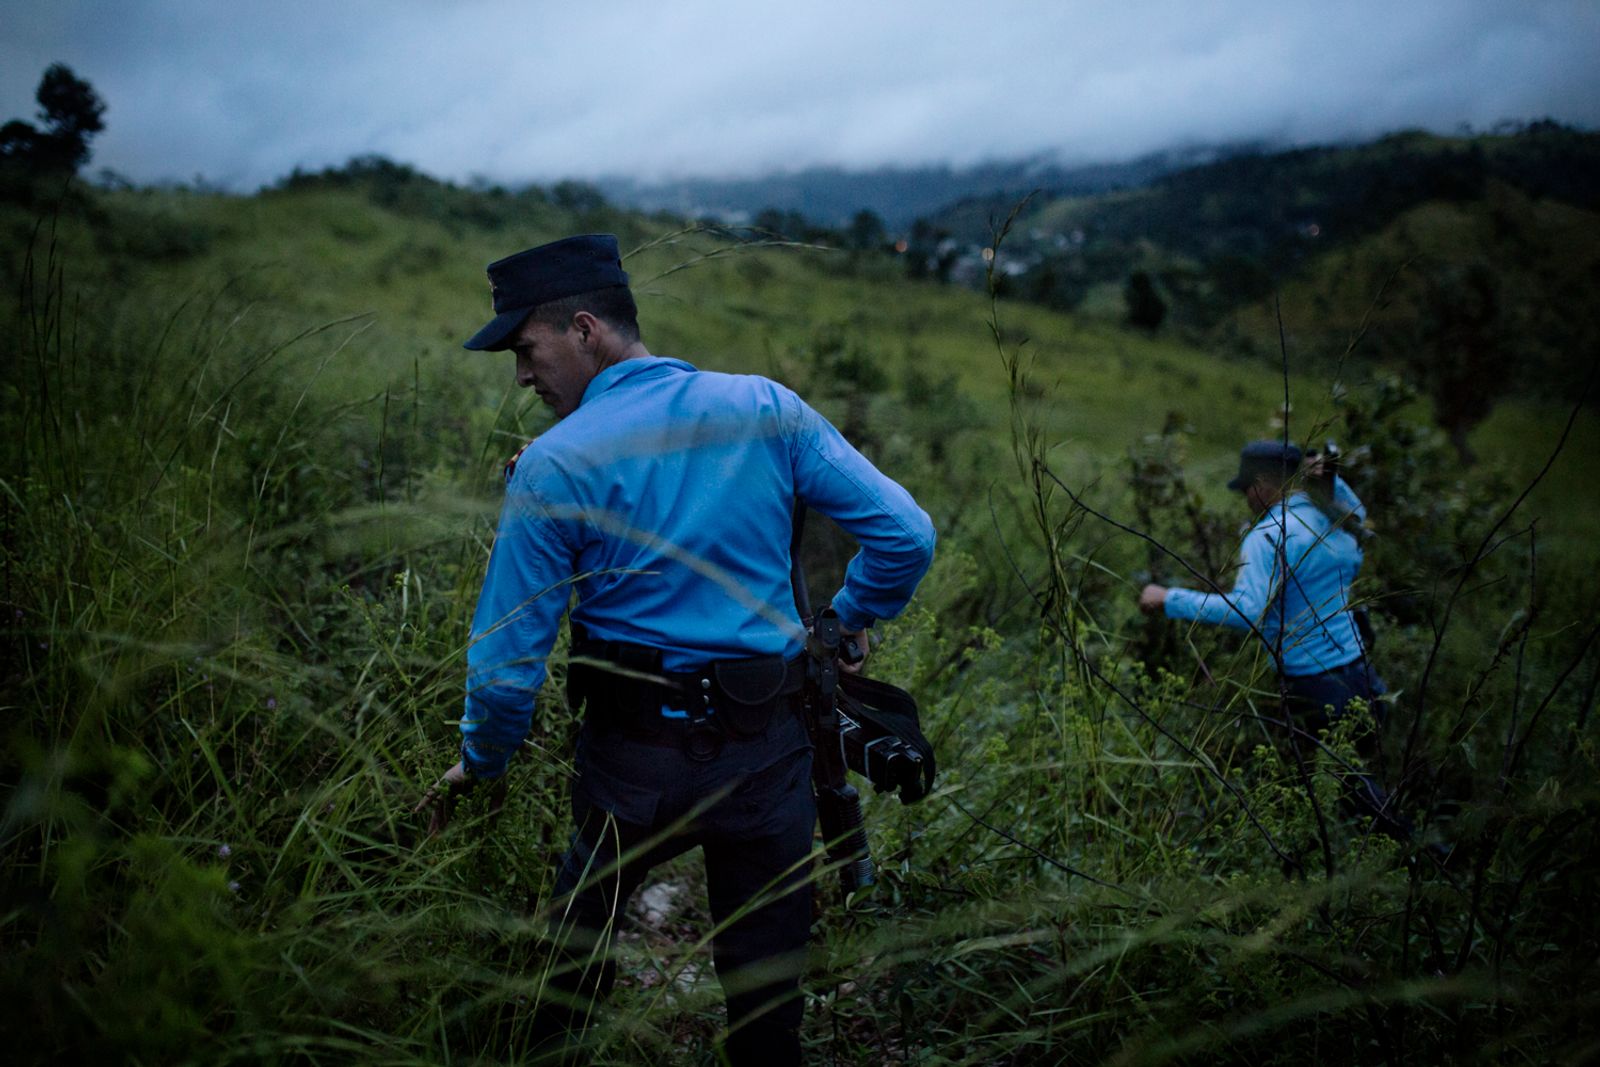 A Dark Tale of Violence in Central America’s Northern Triangle